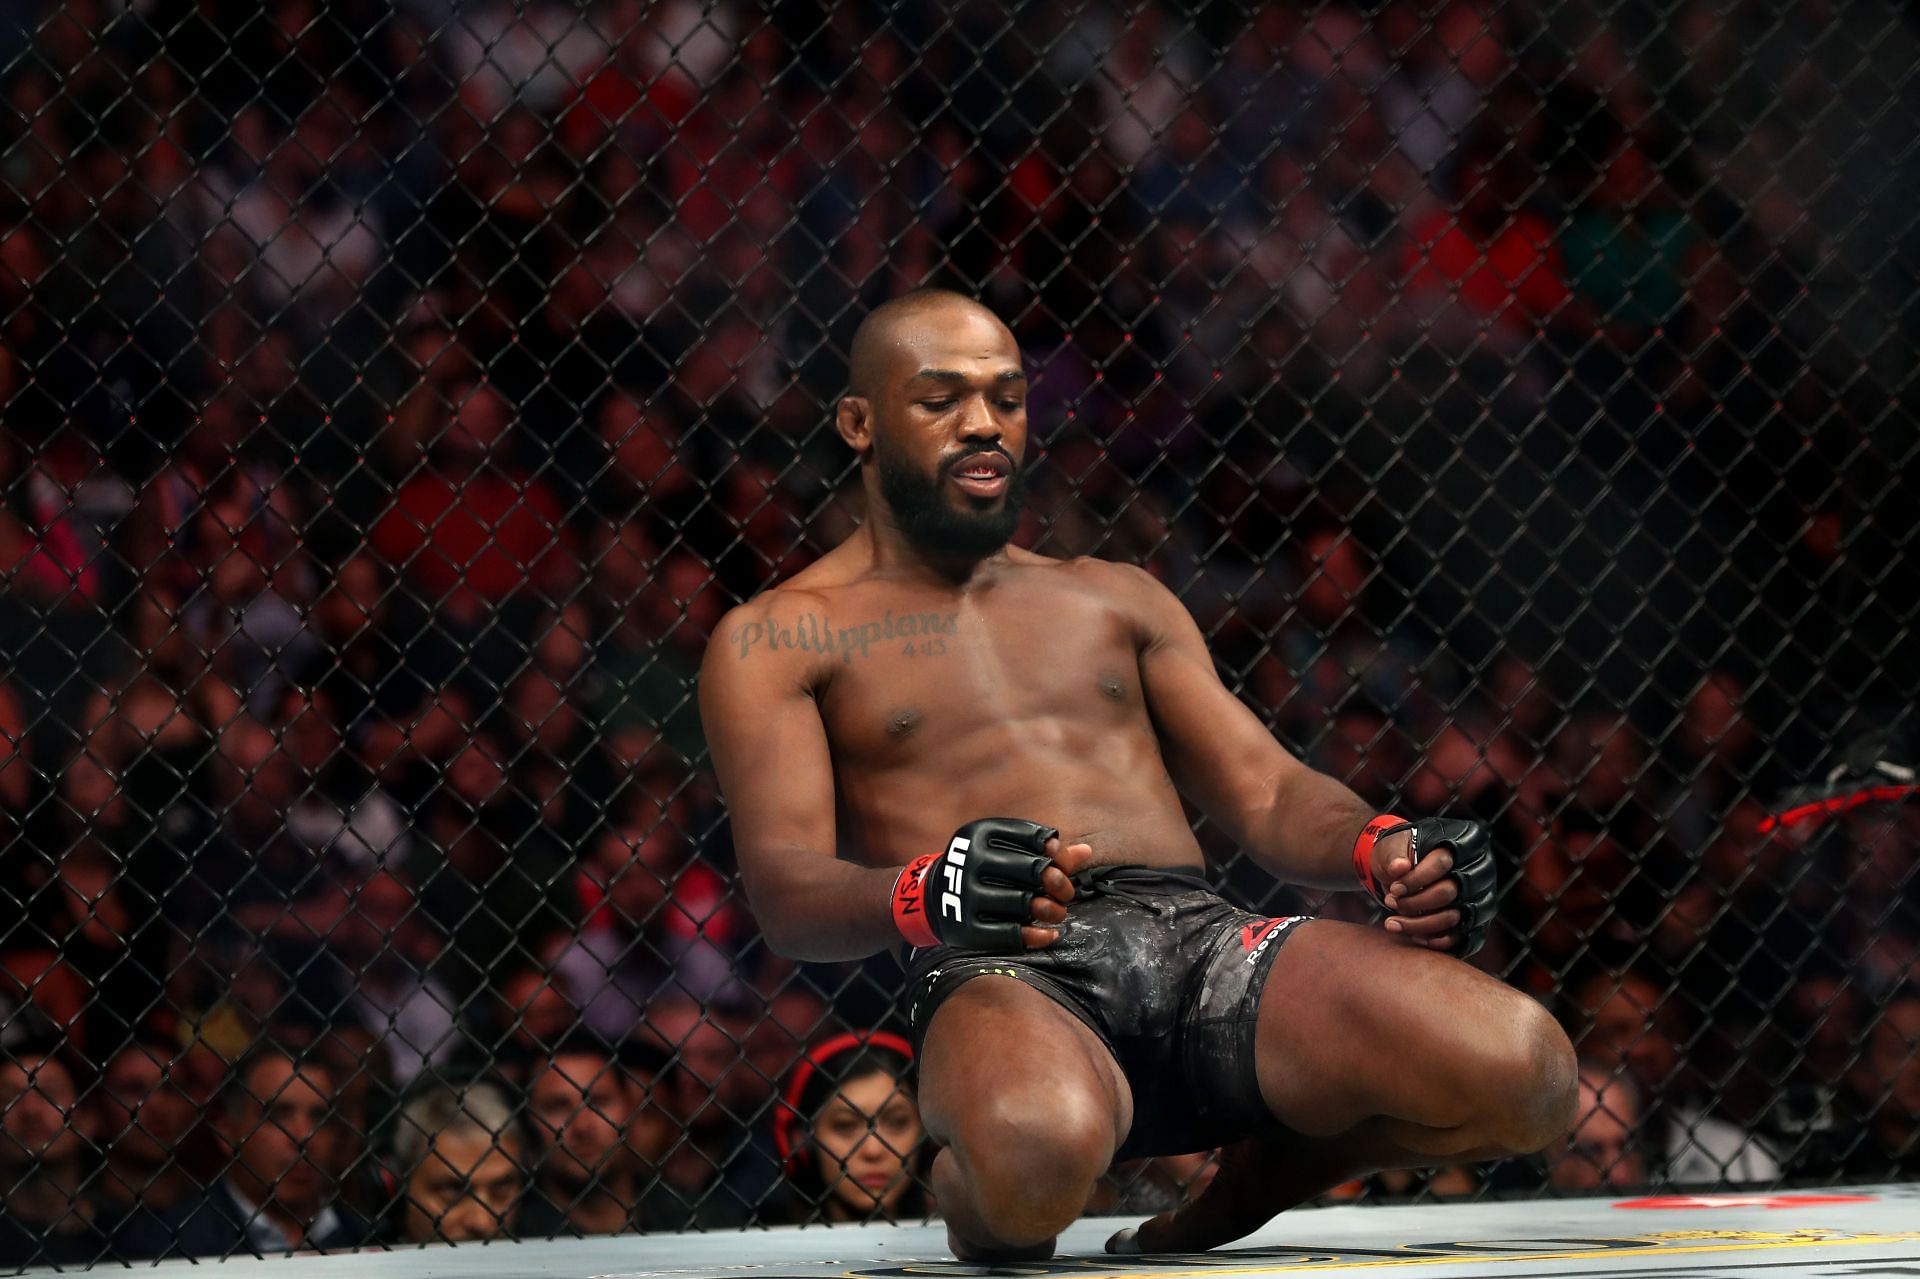 Jon Jones came under fire for refusing a late-notice bout with Chael Sonnen in 2012